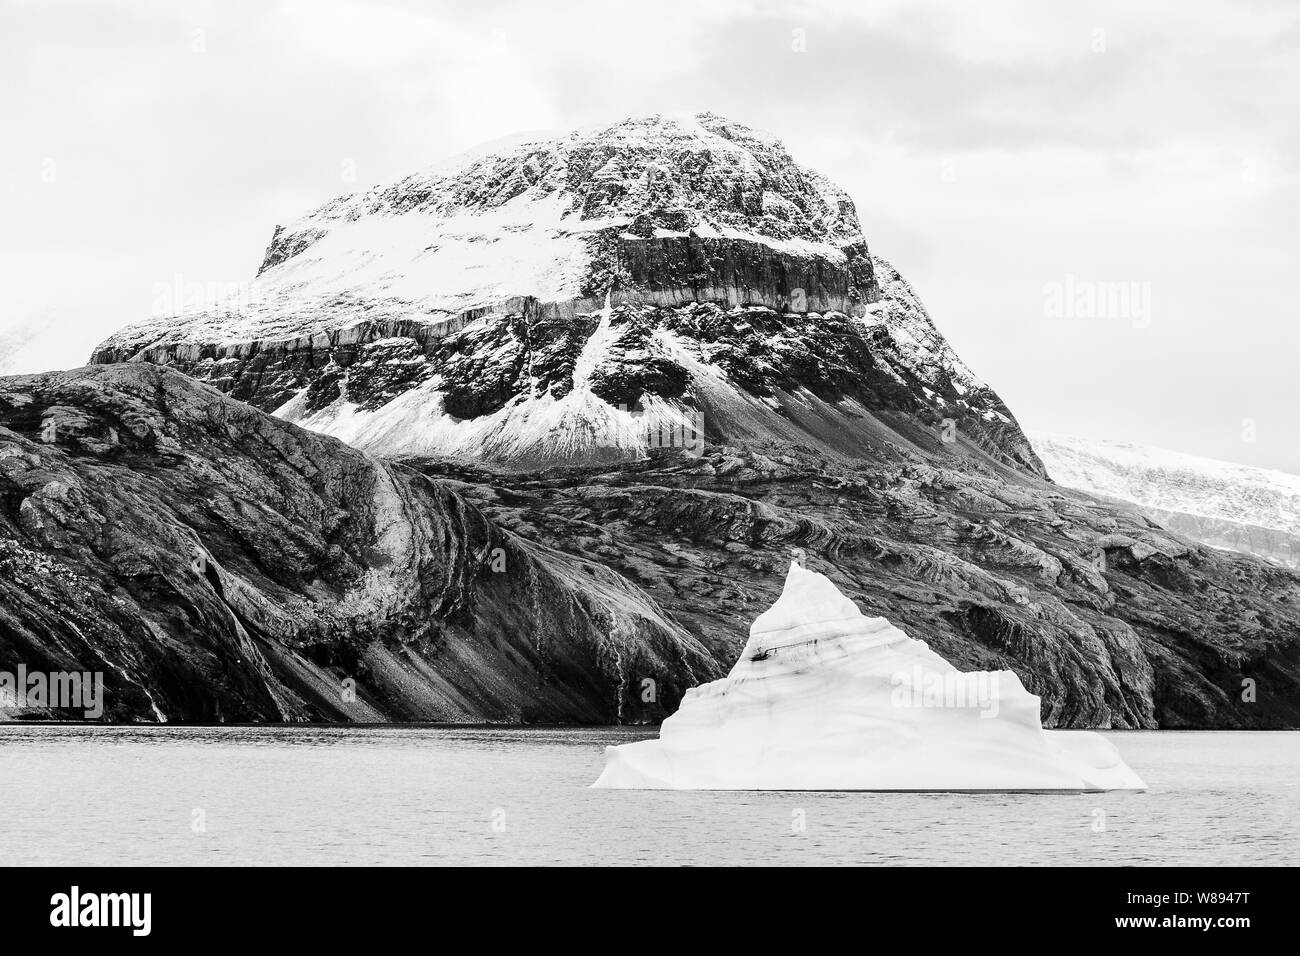 A cone shaped iceberg is dwarf by massive mountain slopes in Kejser Franz Joseph Fjord, Greenland Stock Photo